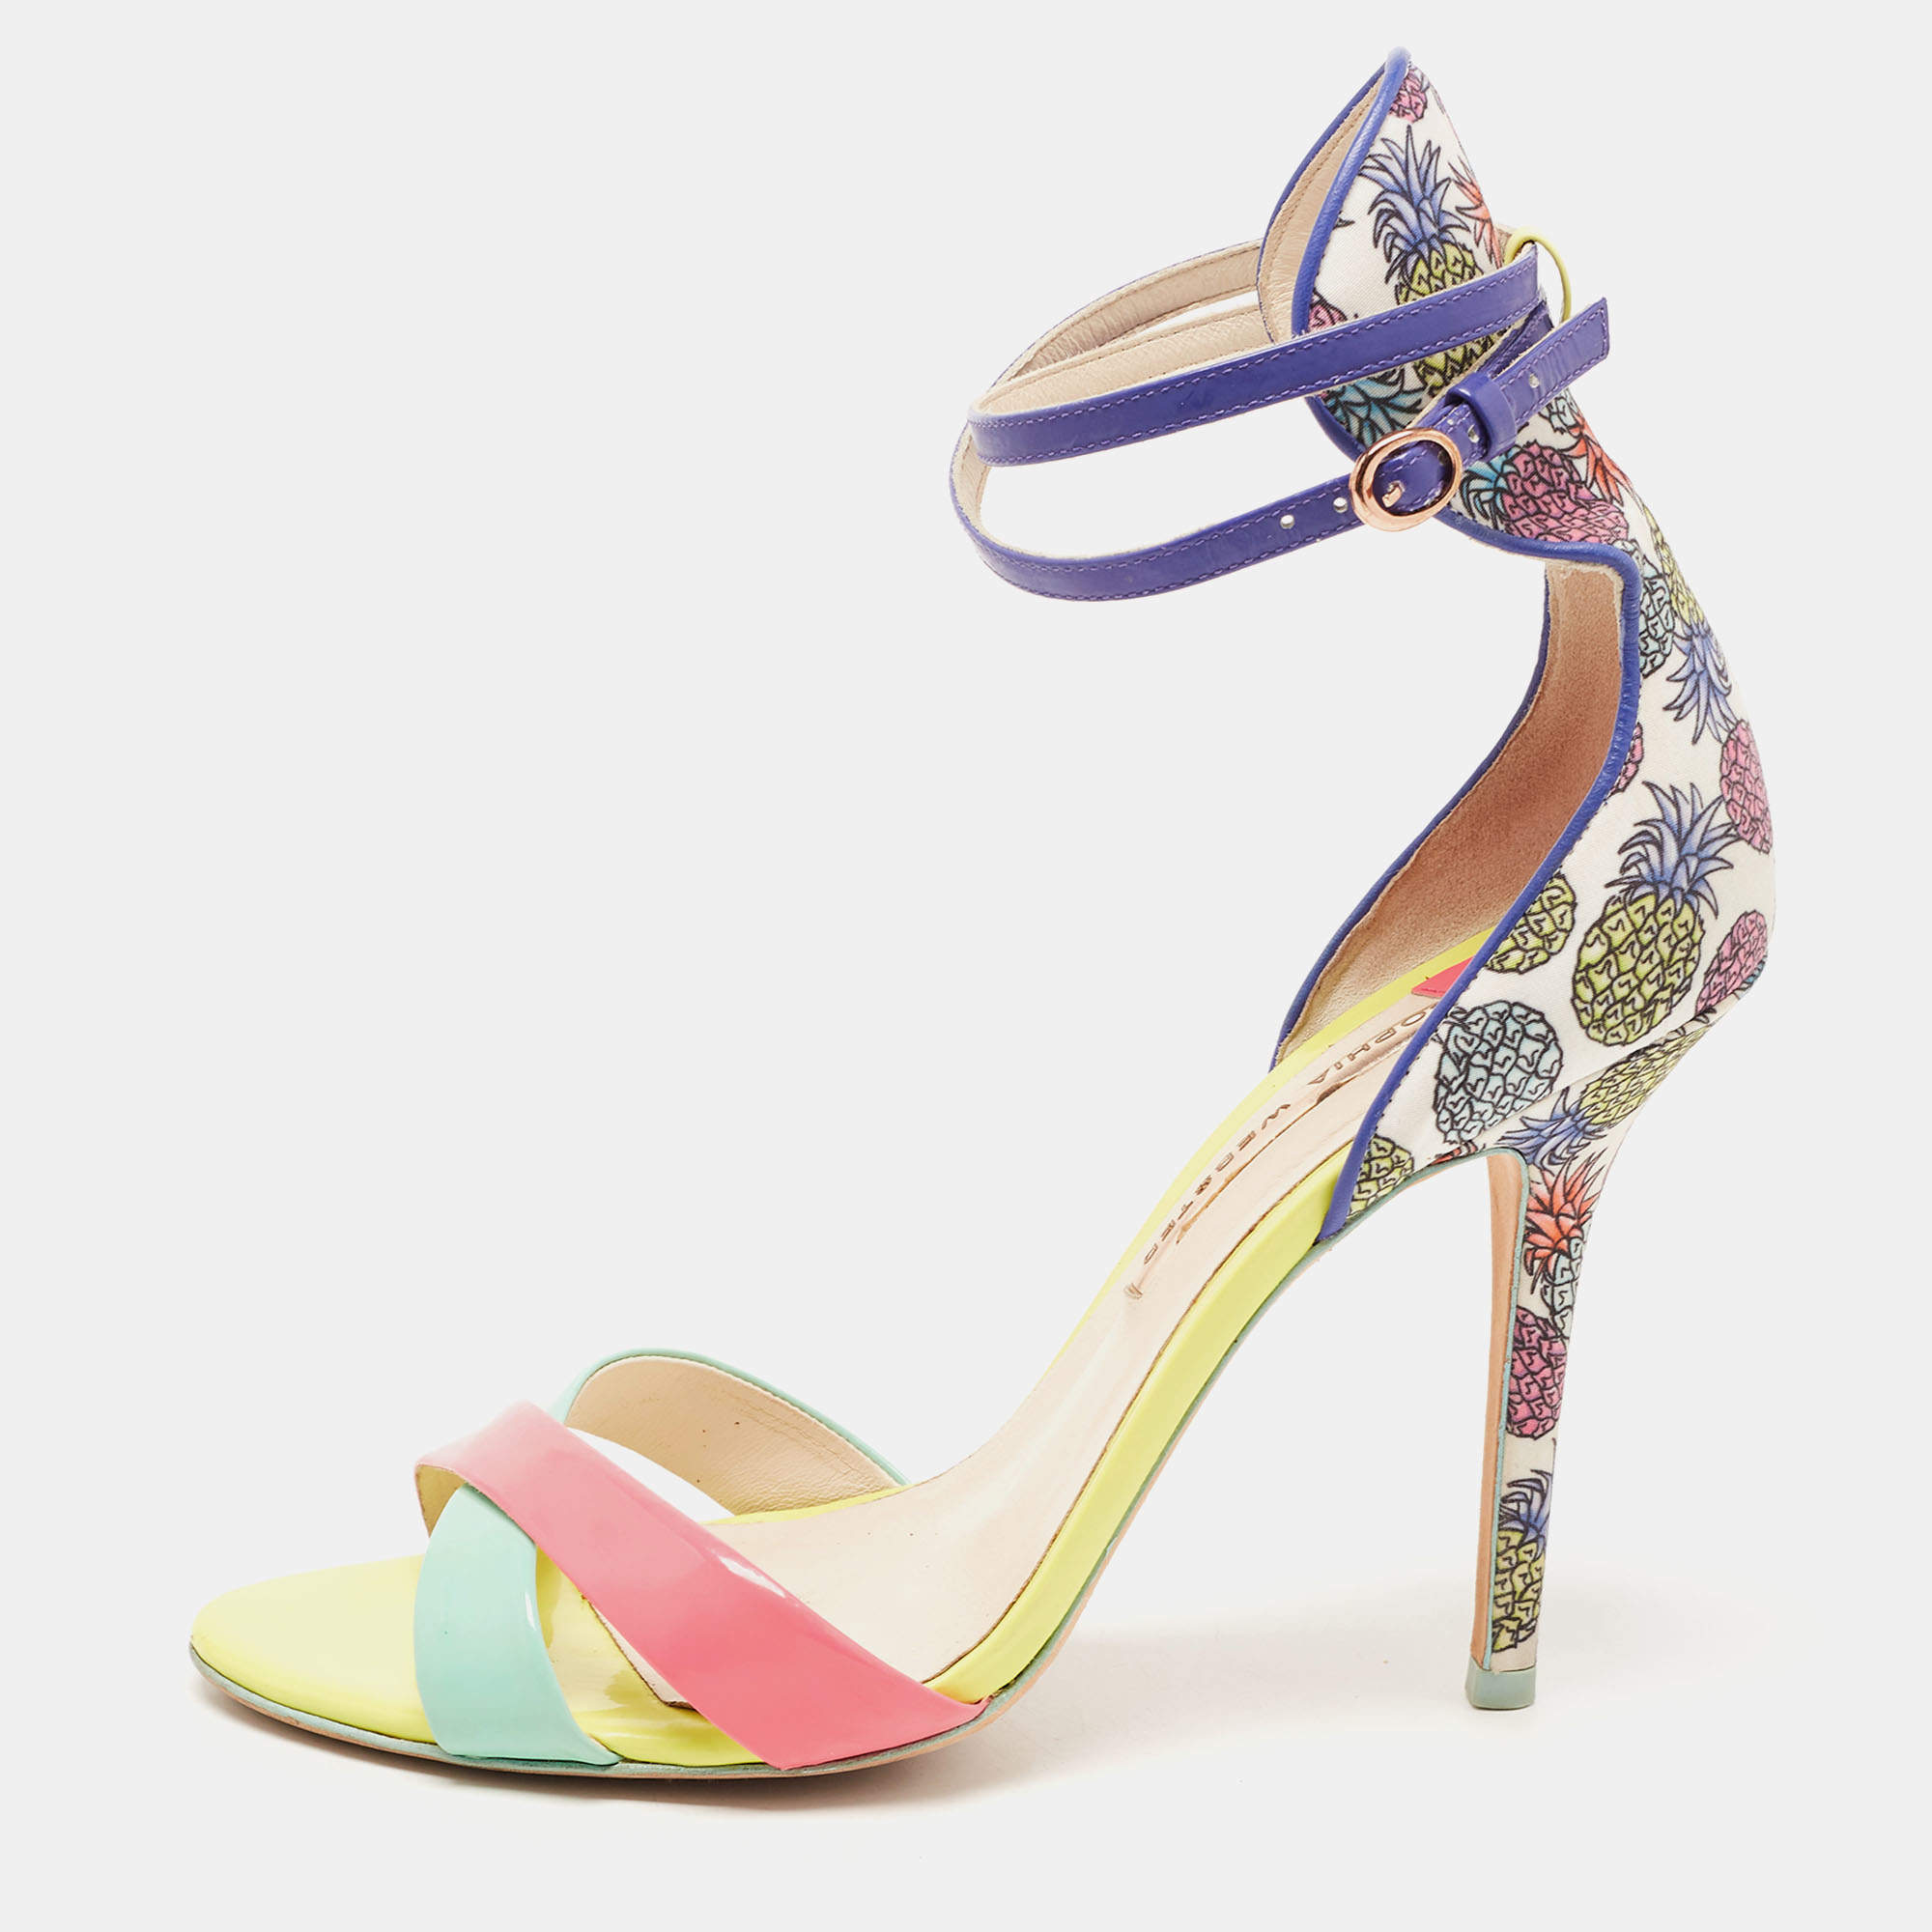 Sophia Webster Multicolor Leather and Printed Fabric Nicole Ankle Strap Sandals Size 41